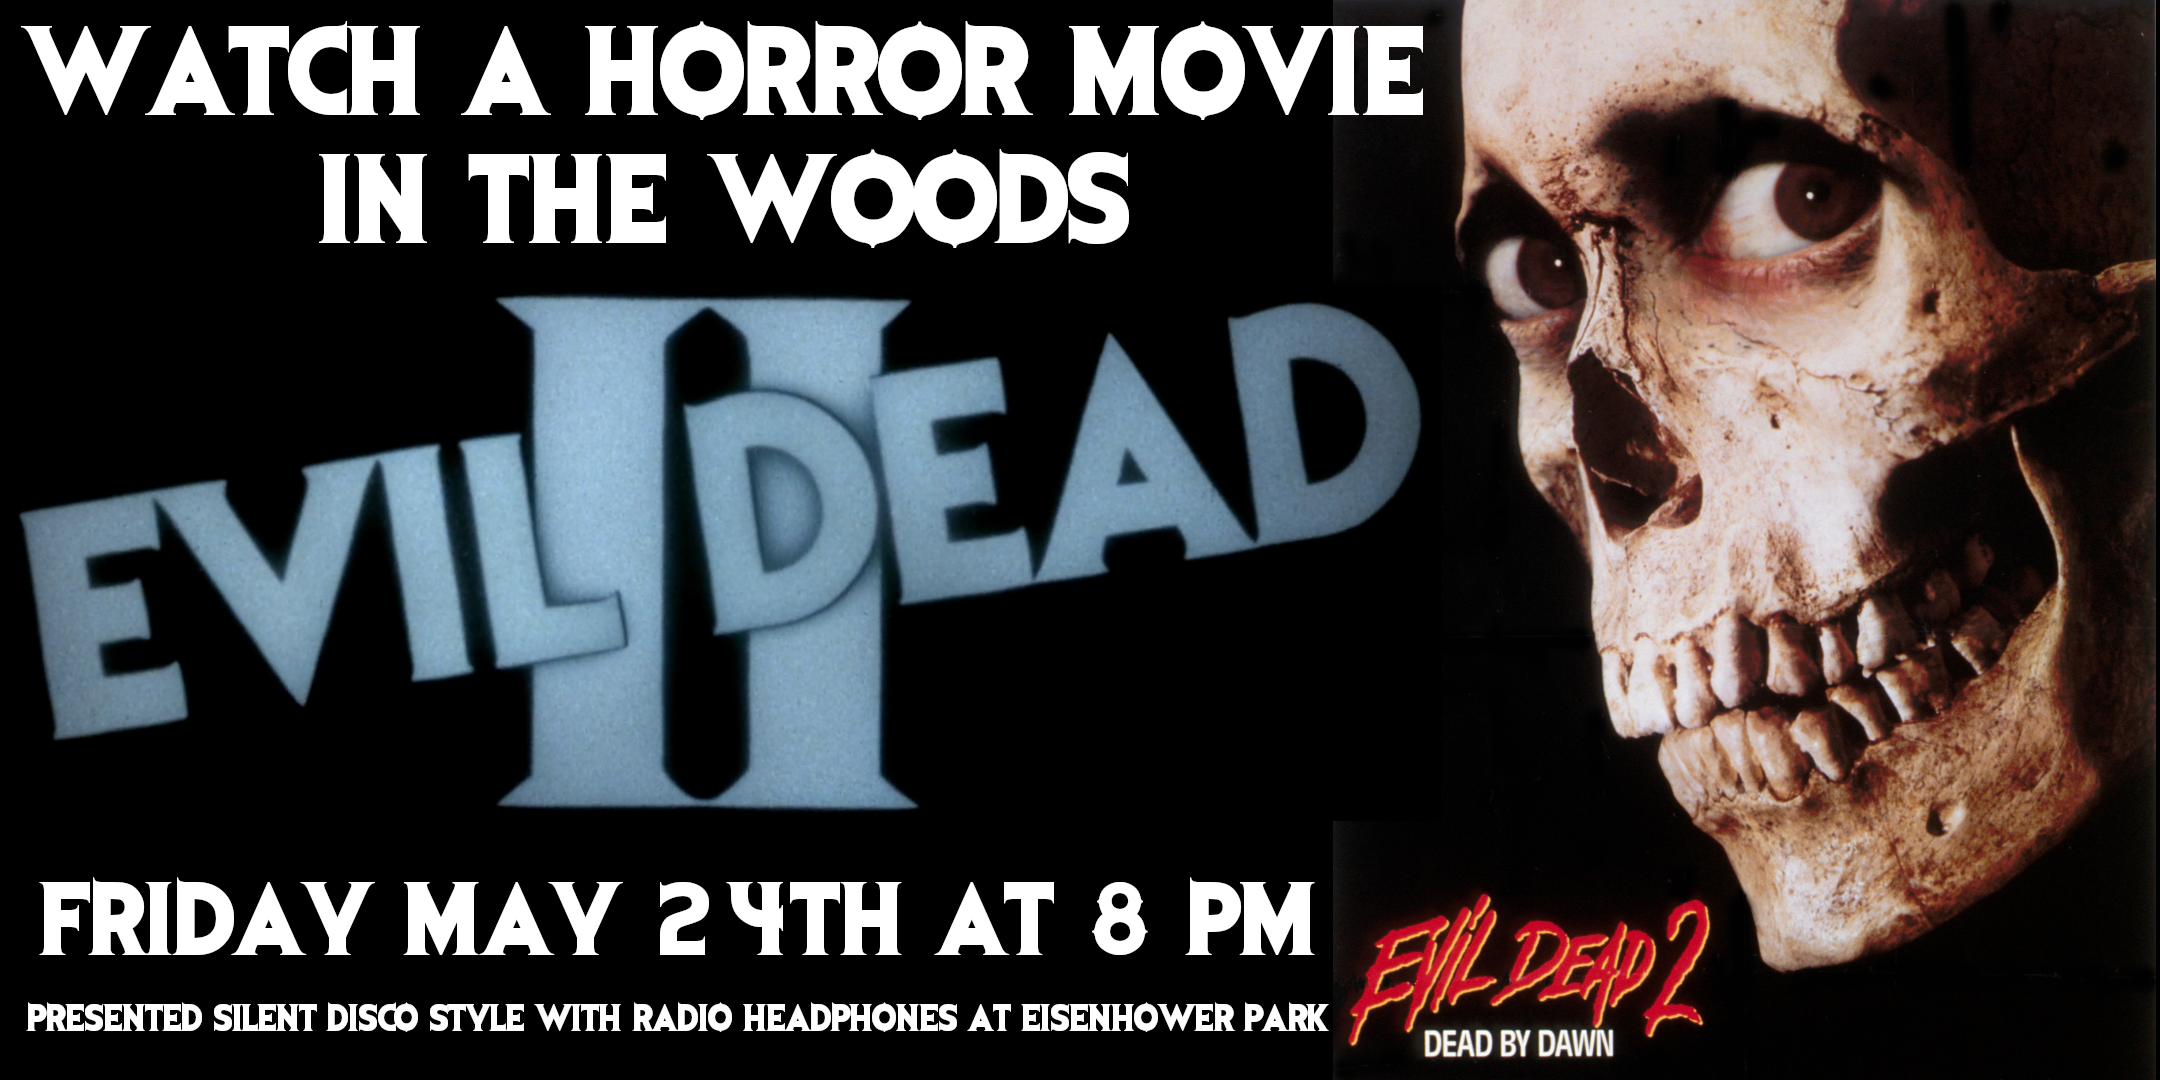 Watch Evil Dead 2 in the woods at night